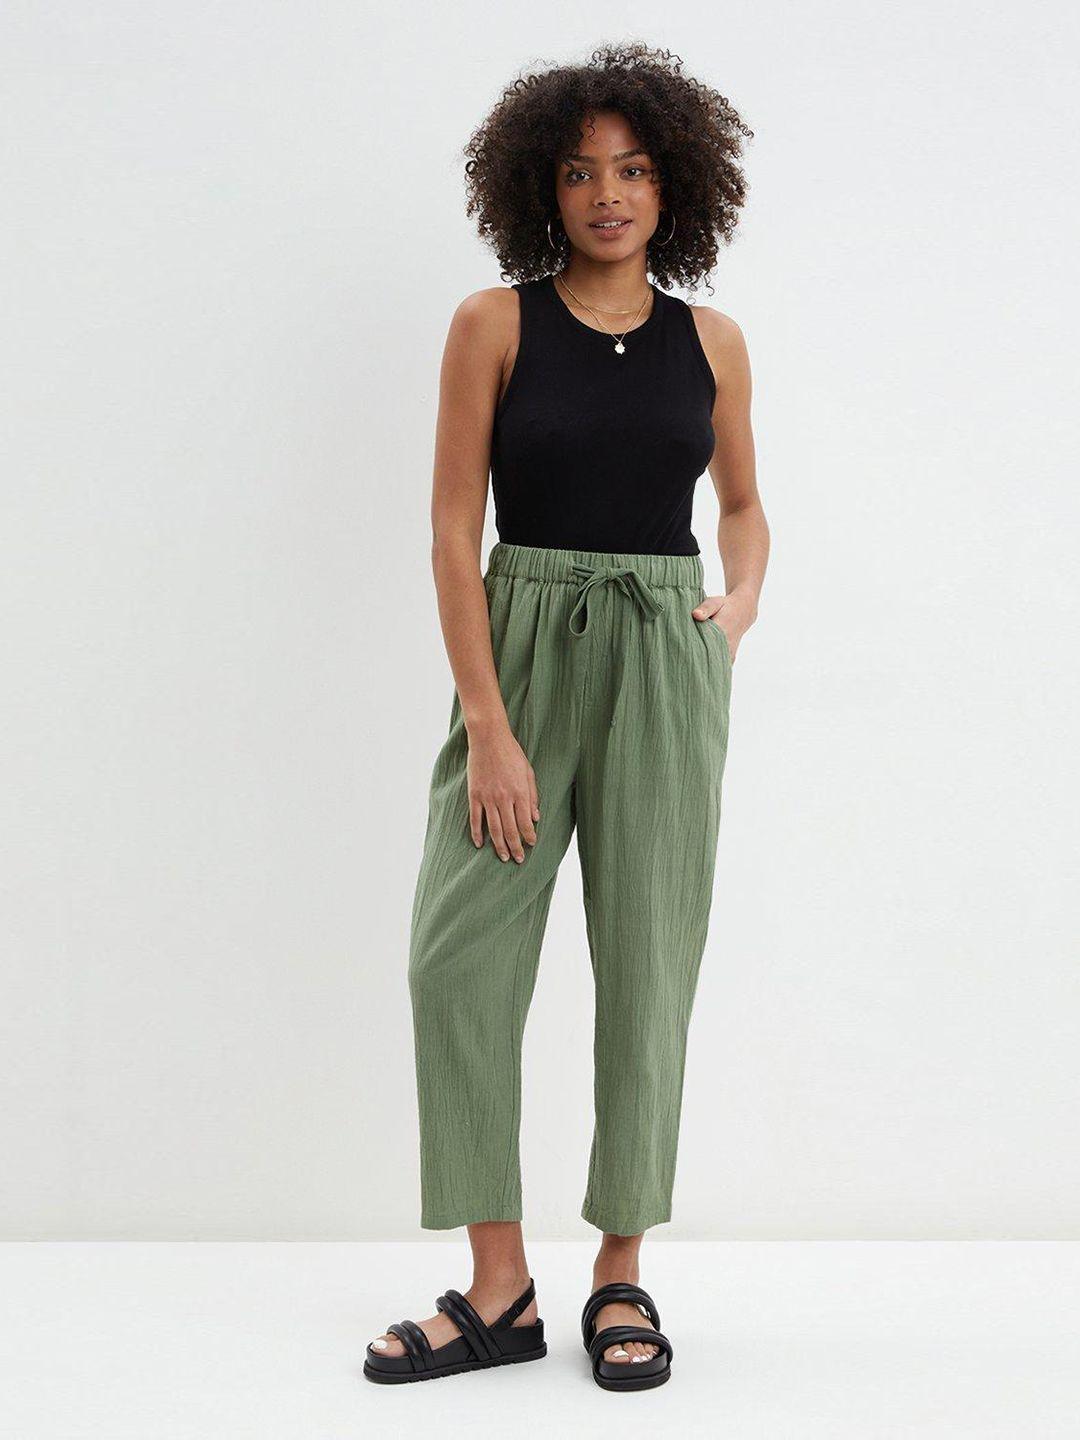 dorothy perkins women cotton linen relaxed pleated trousers